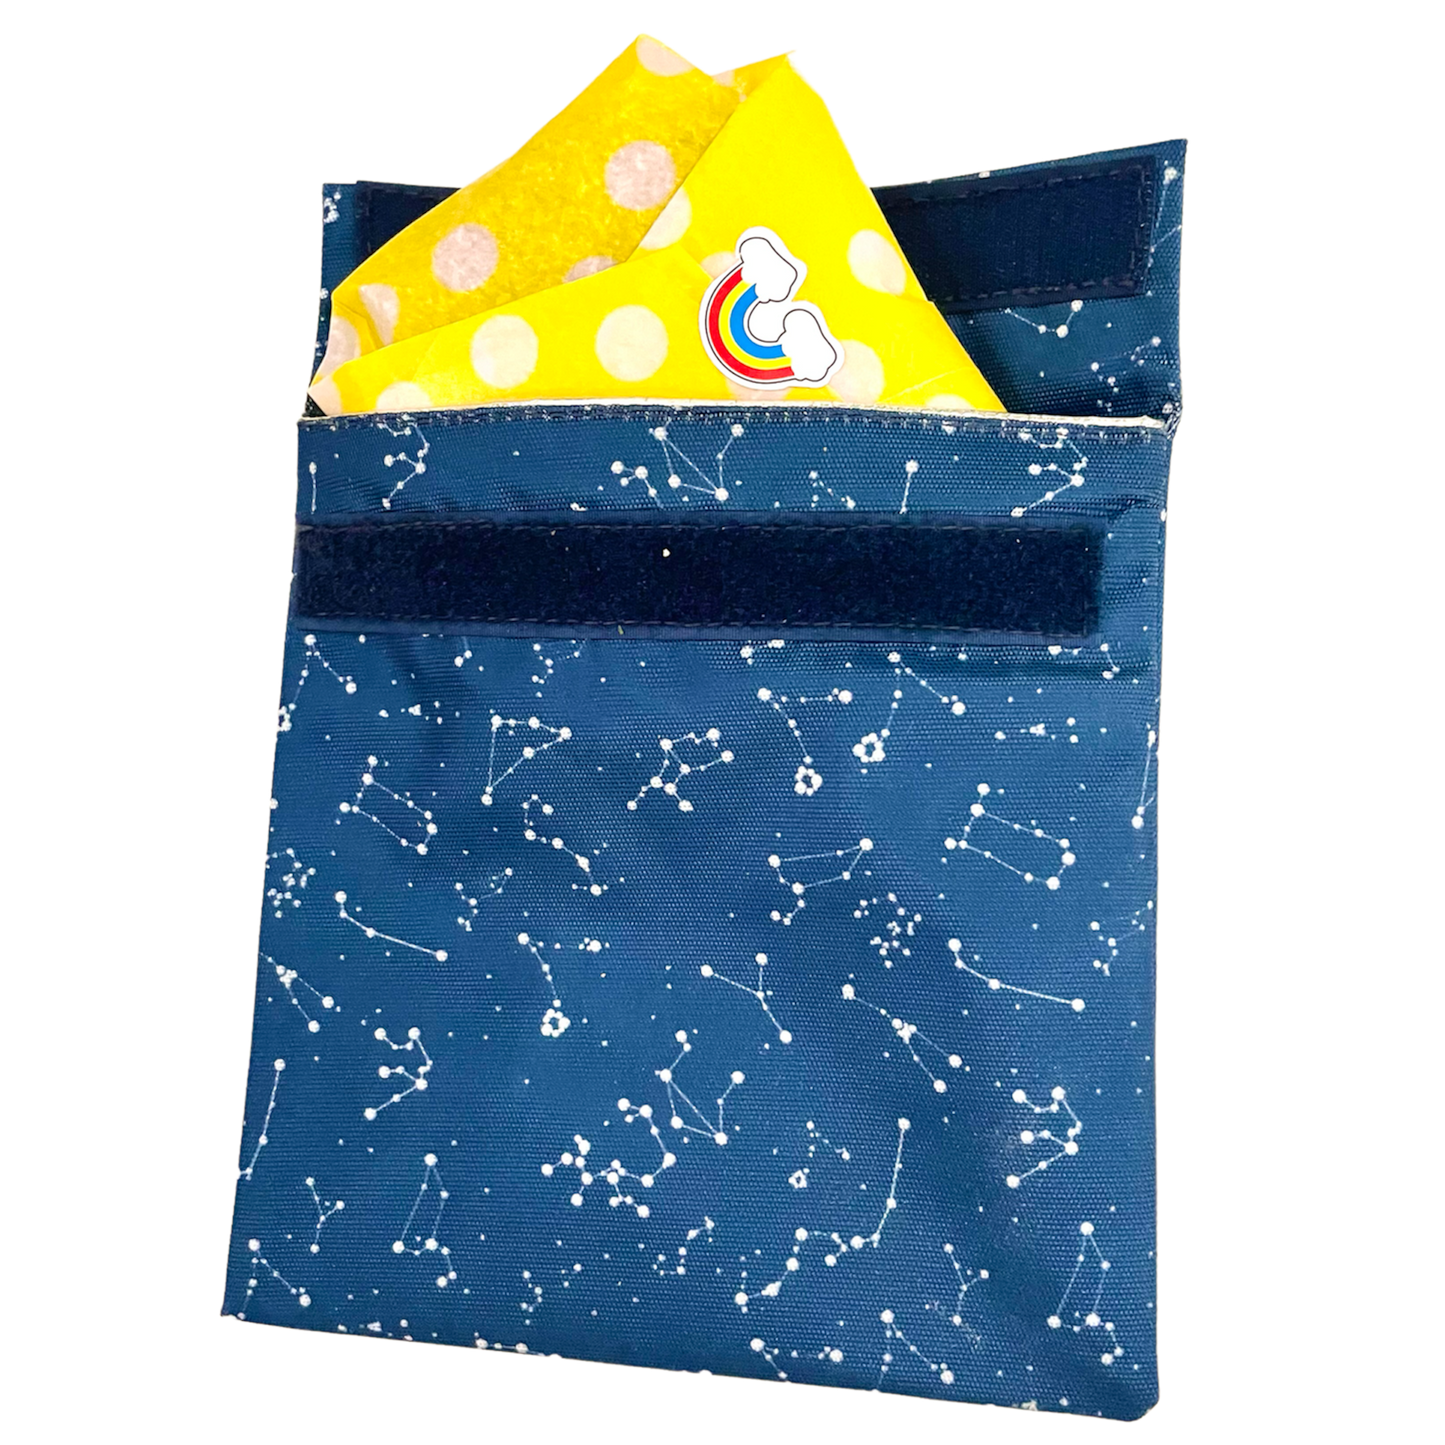 Navy blue re-usable sandwich bag holding a sandwich wrapped in yellow pepper